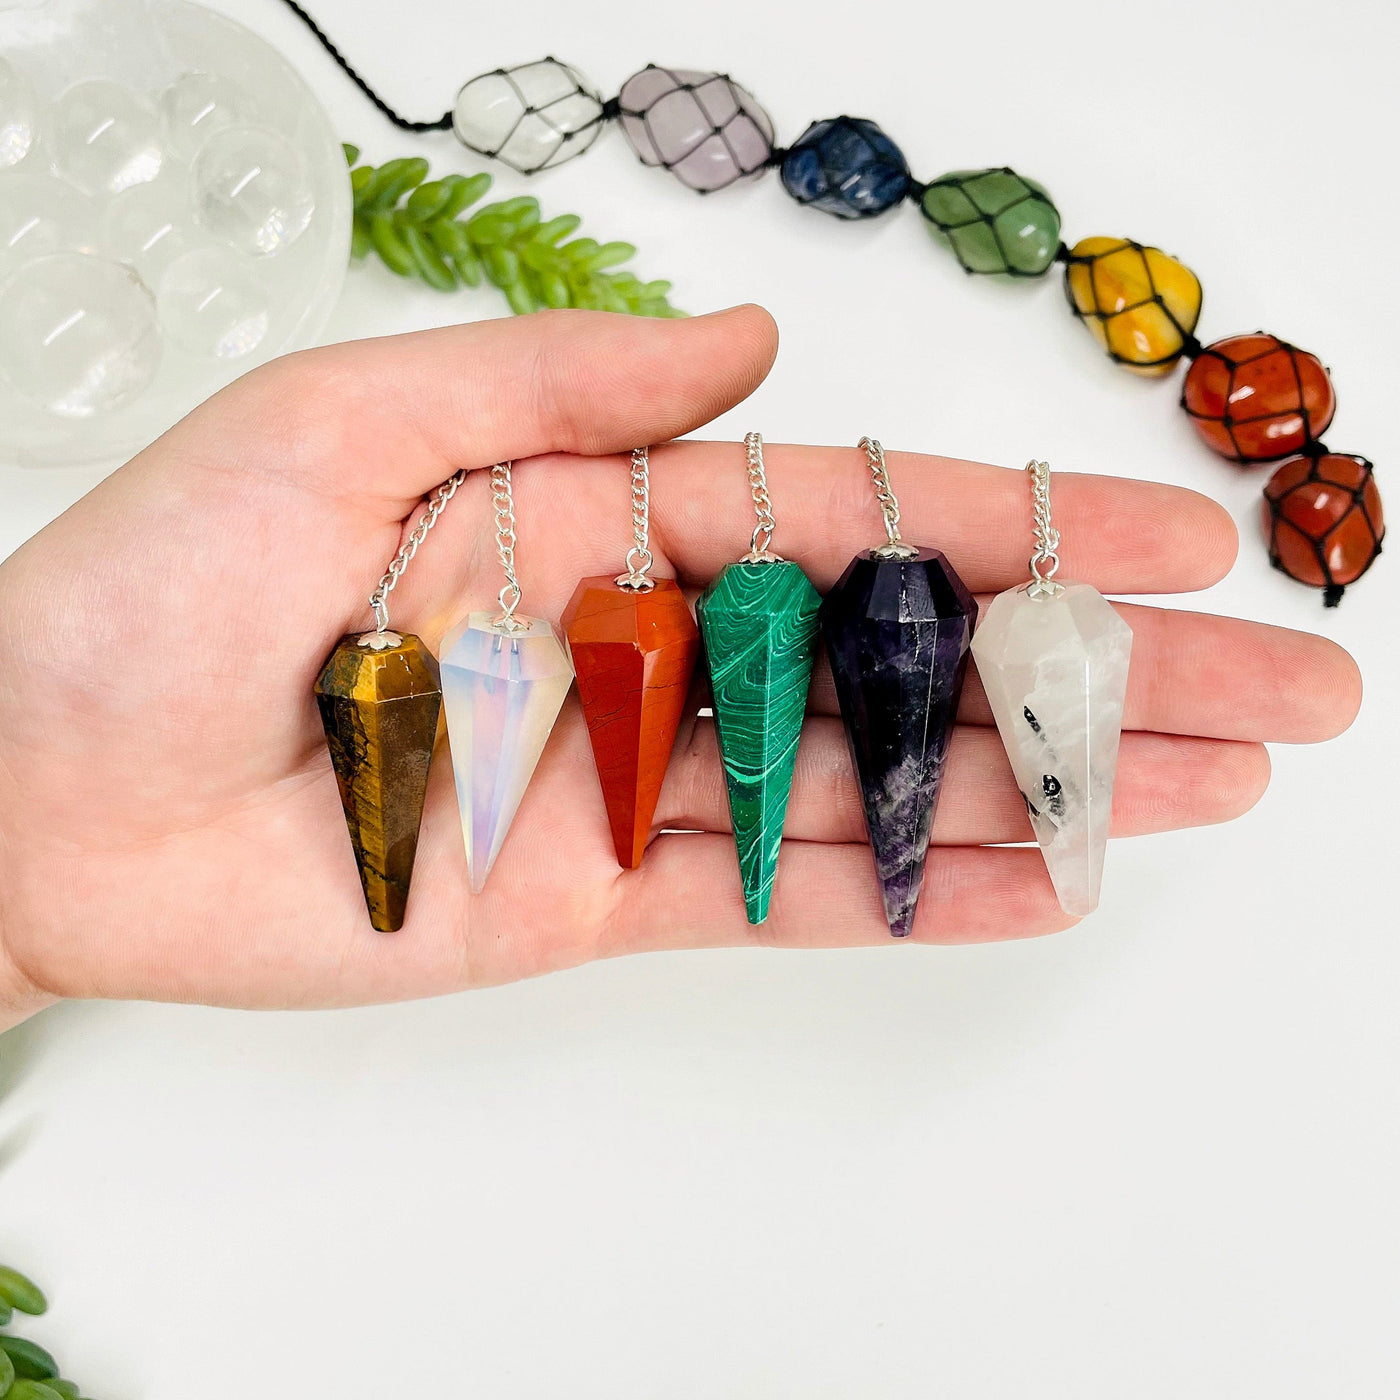 six different pendulum pendants in hand for size reference